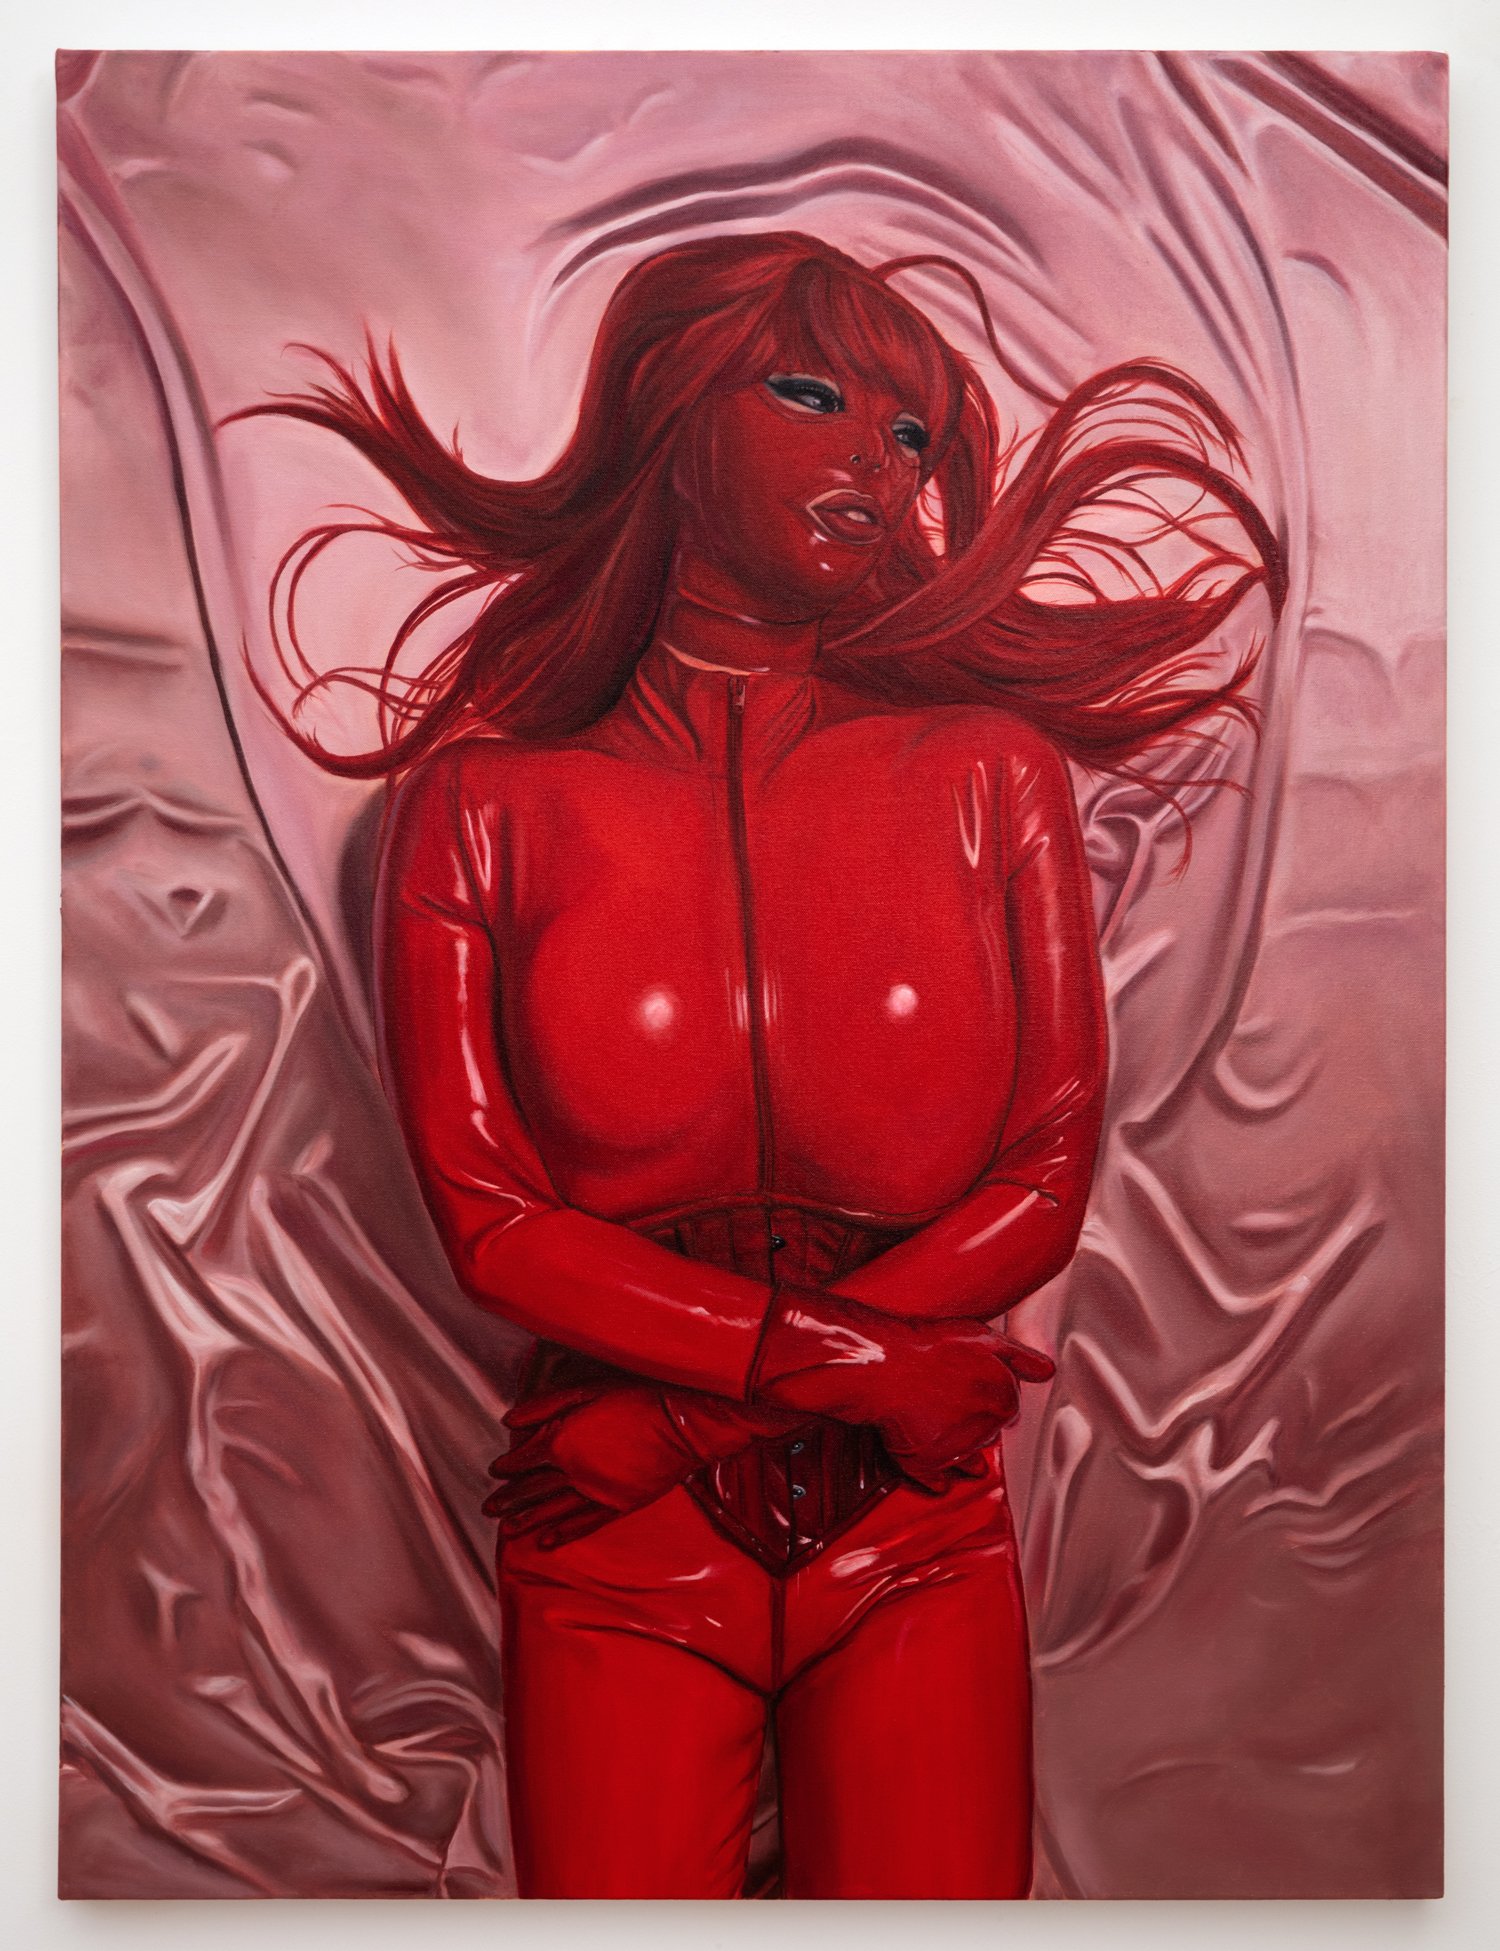  Lisa Saeboe,  Rubber Madonna , 2023, Oil on Canvas, 36 x 48 inches   